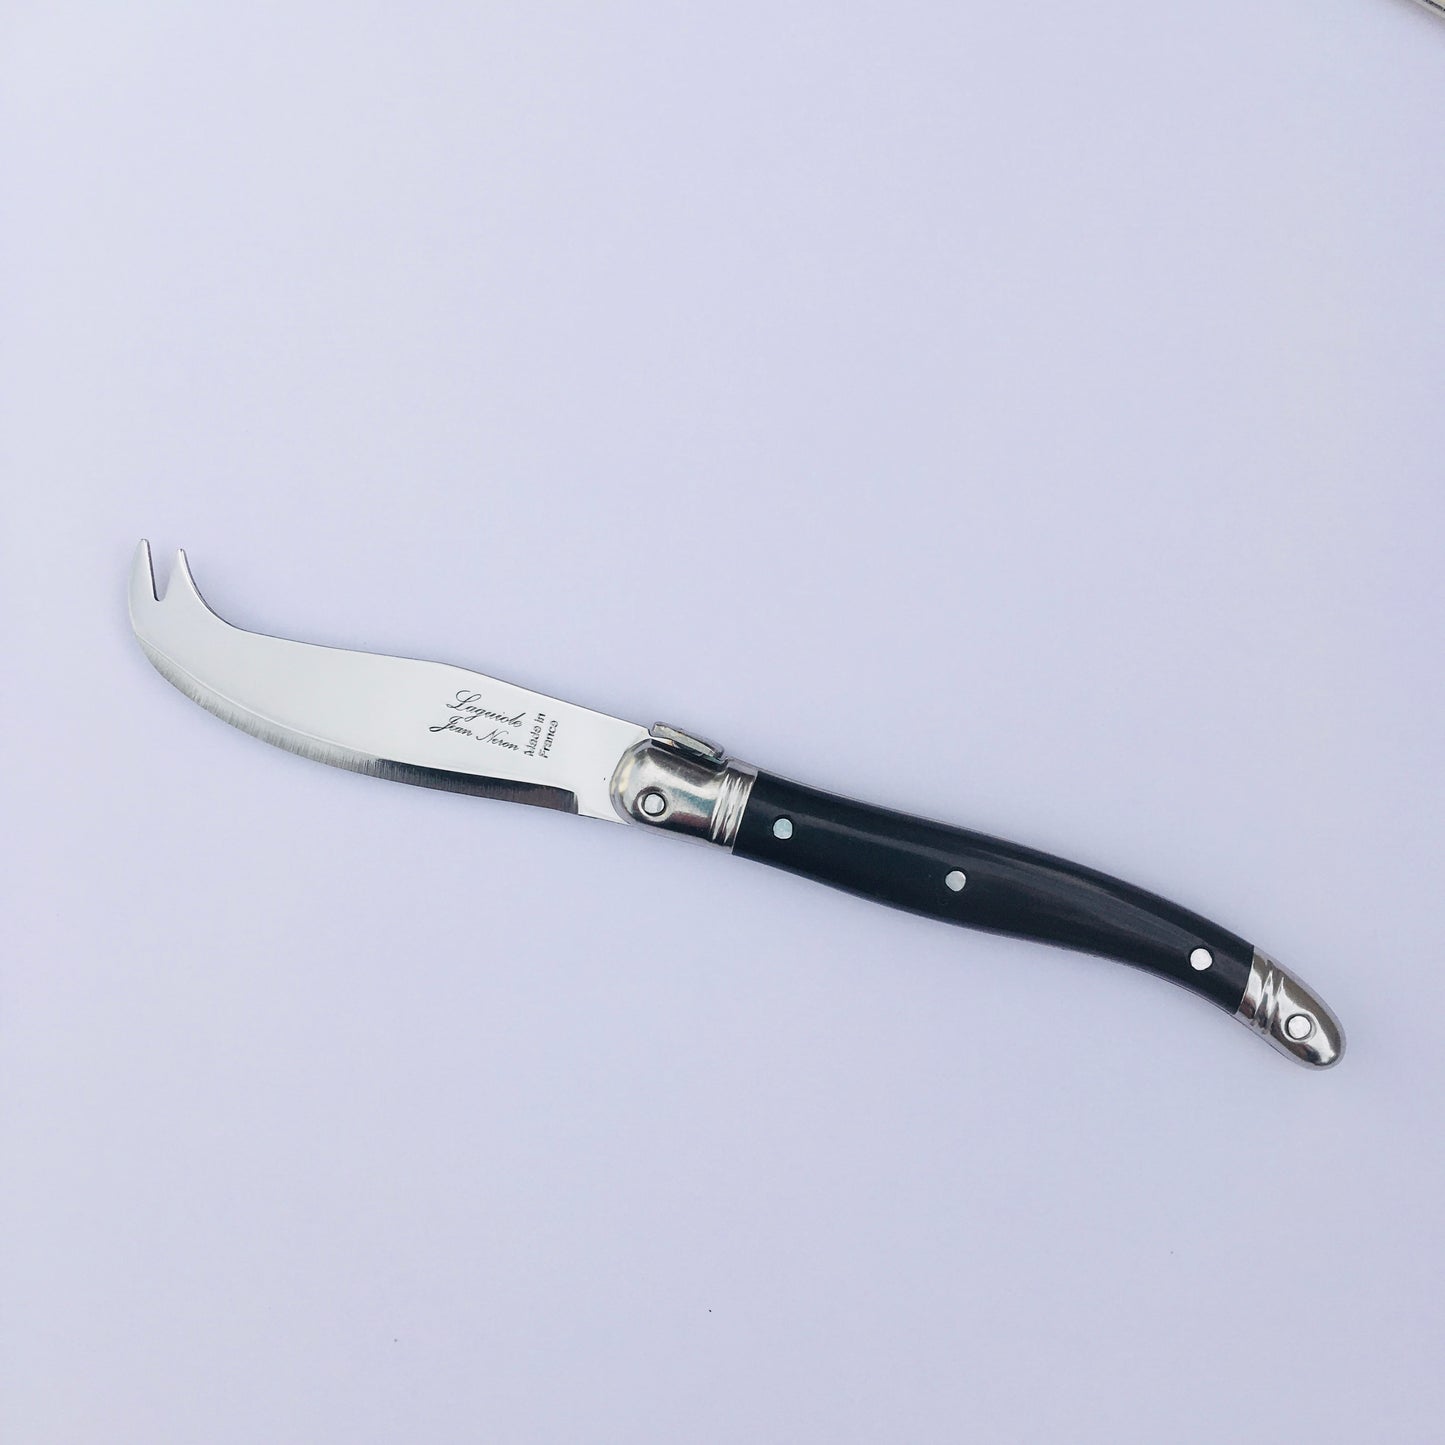 Short Cheese Knife - Ivory or Black